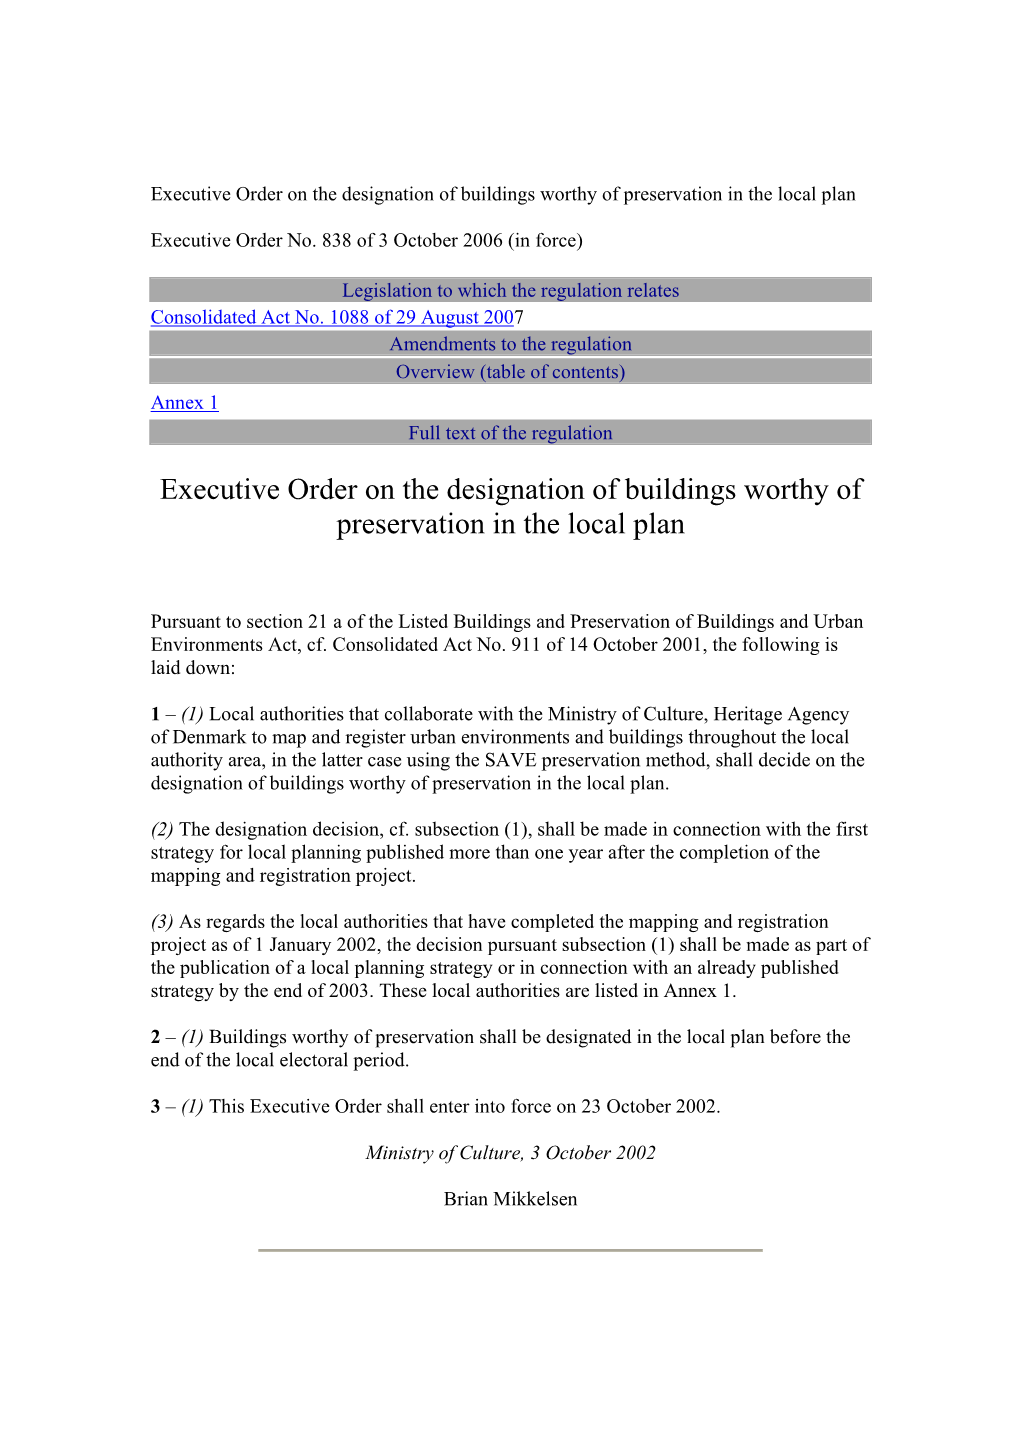 Executive Order on the Designation of Buildings Worthy of Preservation in the Local Plan